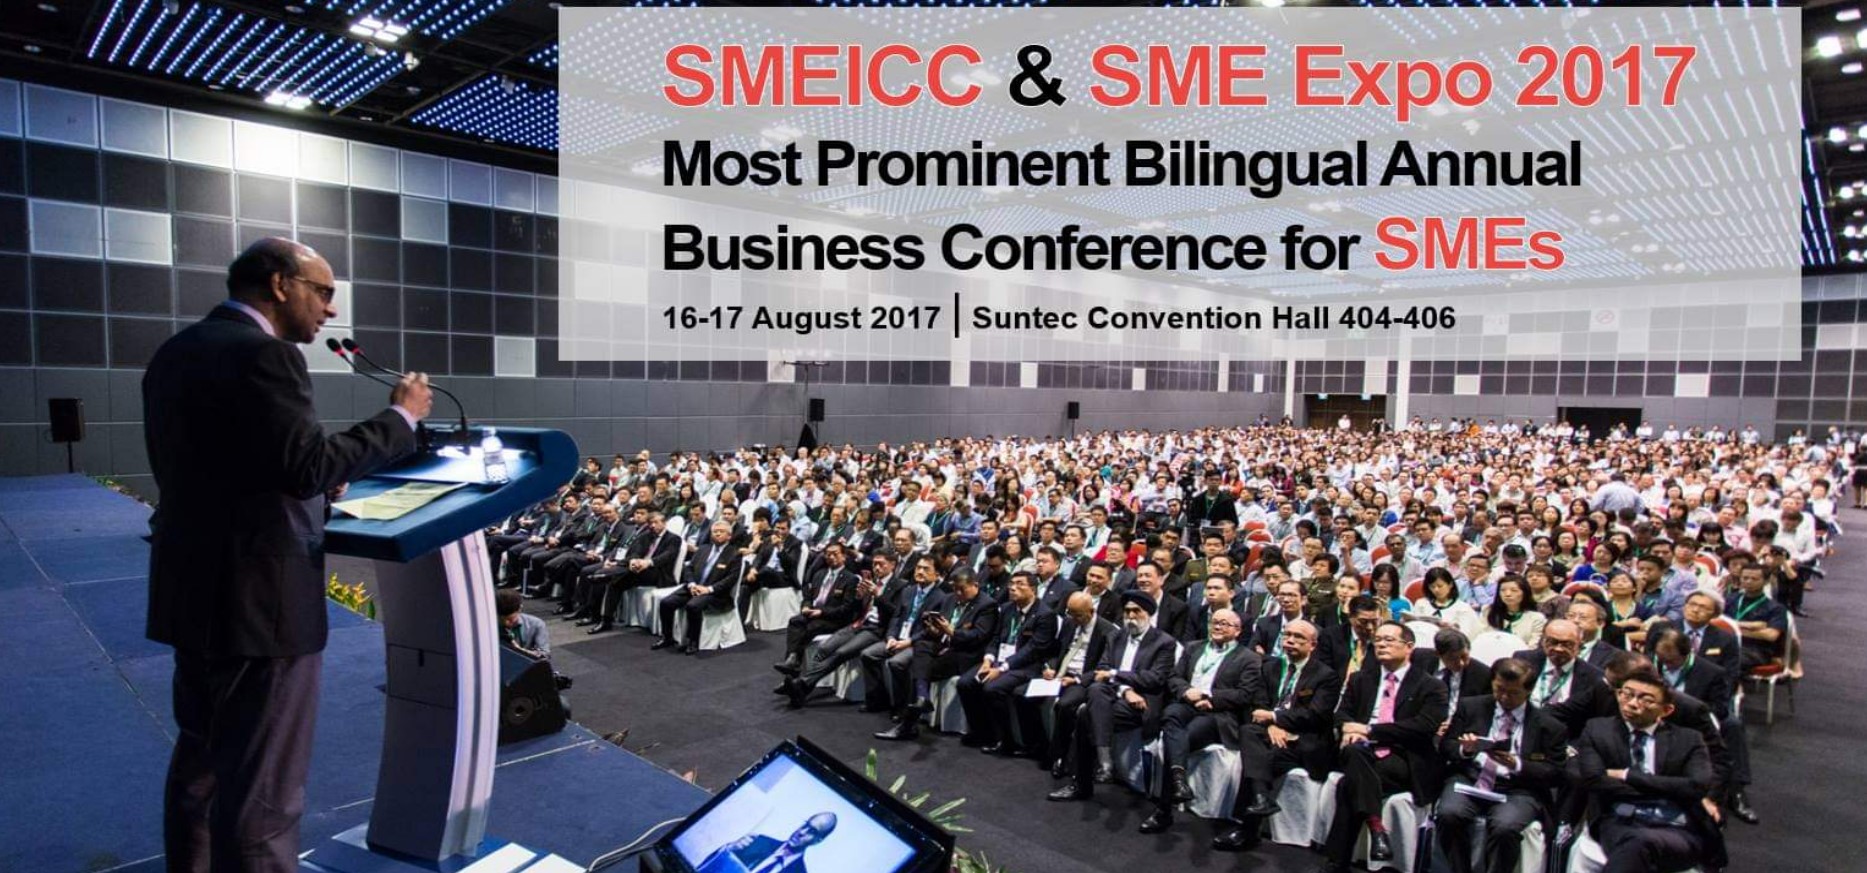 FOMO Pay invited to share payment solutions at this year’s SMEICC